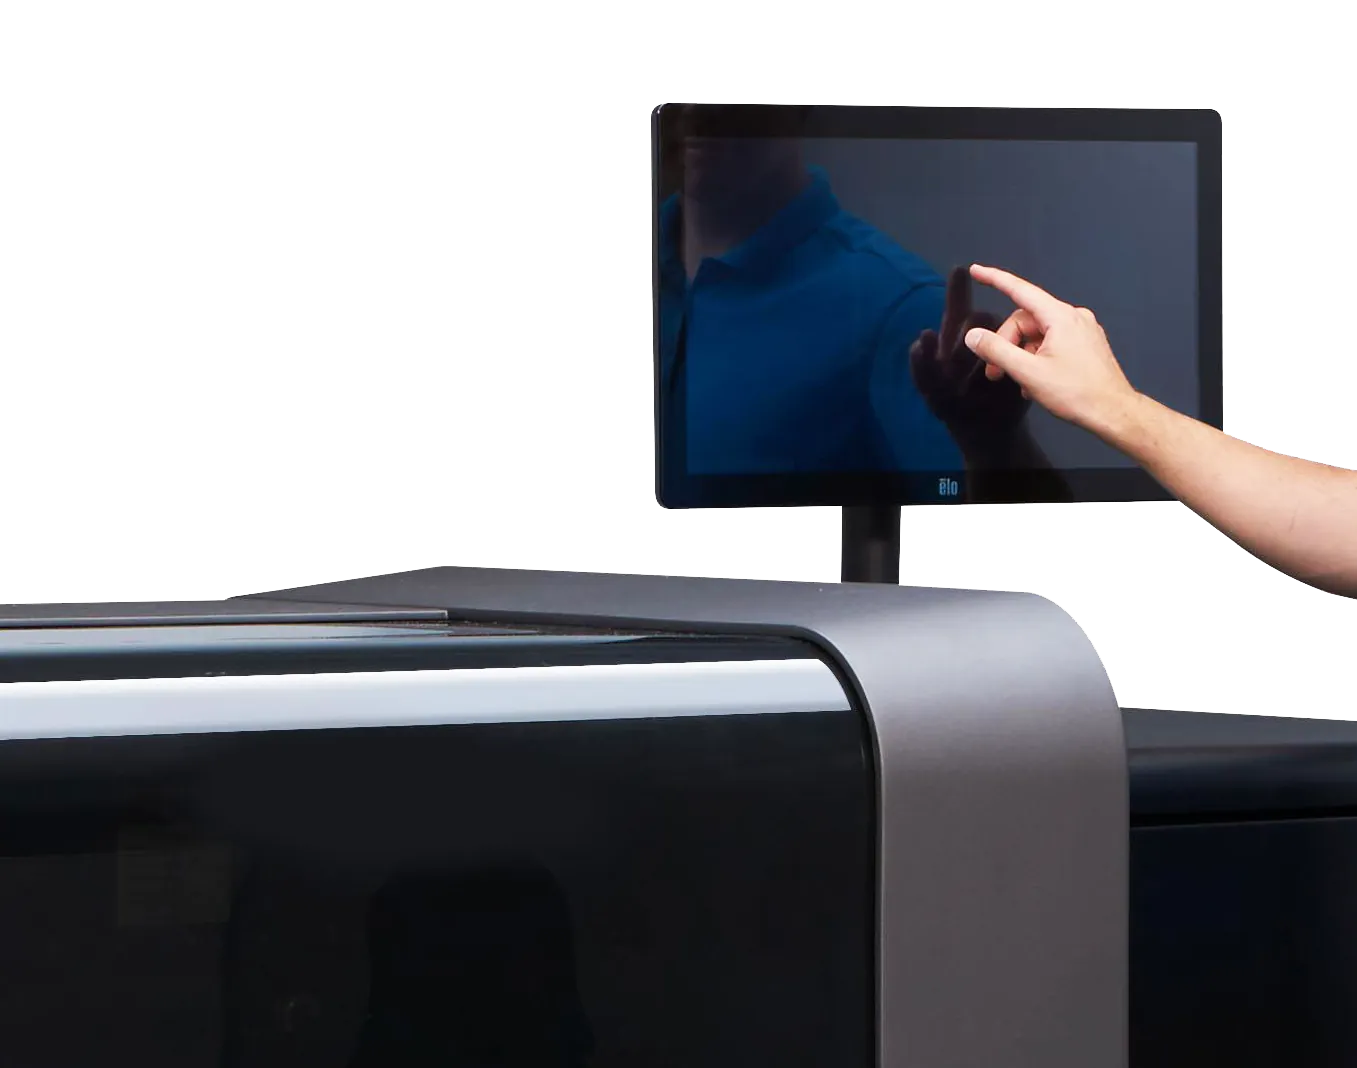 The Stratasys J850 is equipped with a touchscreen montior workstation